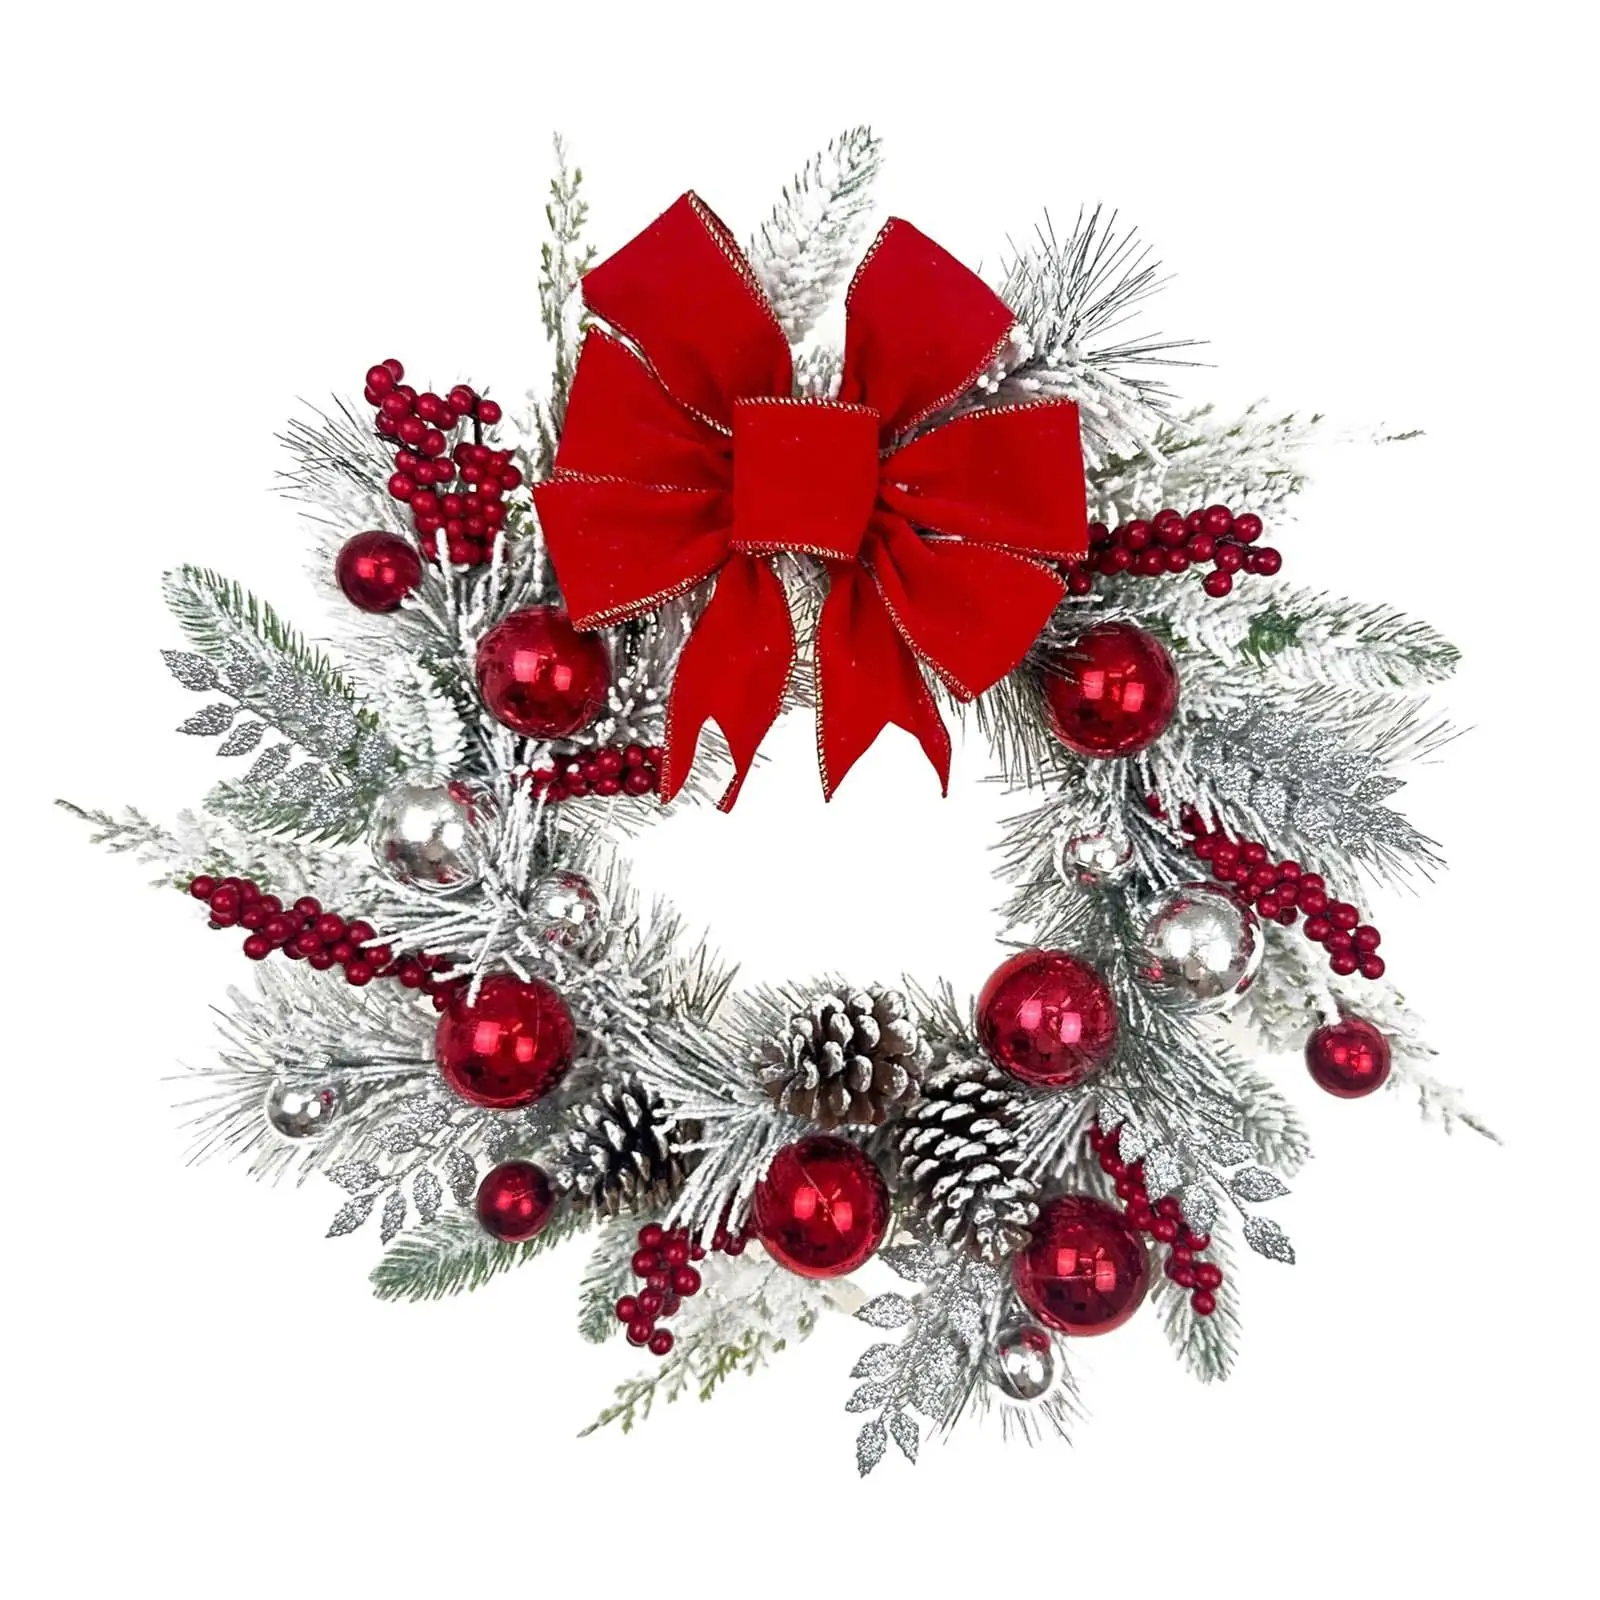 Christmas Wreath Decorative Realistic Hanging Ornament Garland Front Door Winter Wreath for House Office Wedding Xmas Decor